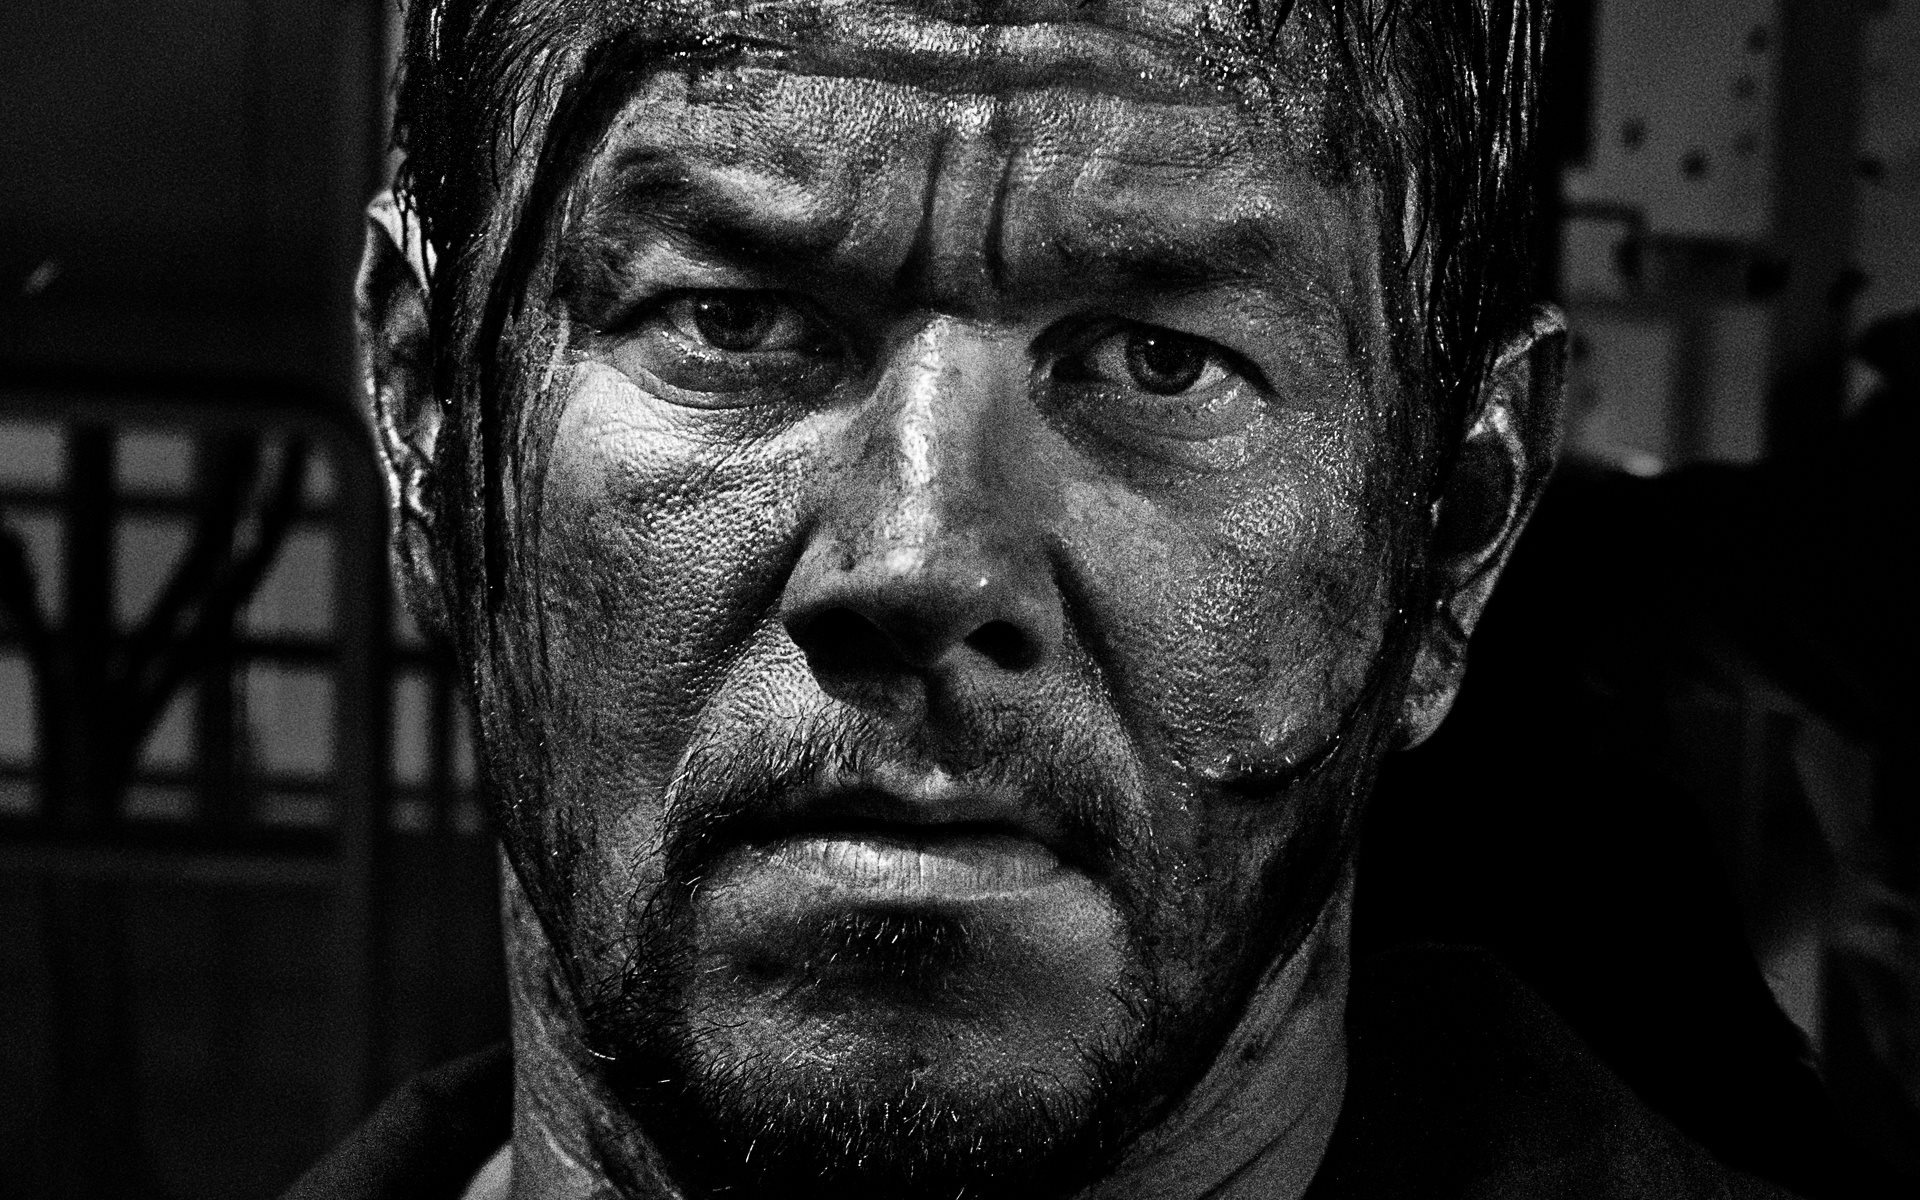 Deepwater Horizon, Mike Williams character, Mark Wahlberg, High-quality wallpapers, 1920x1200 HD Desktop